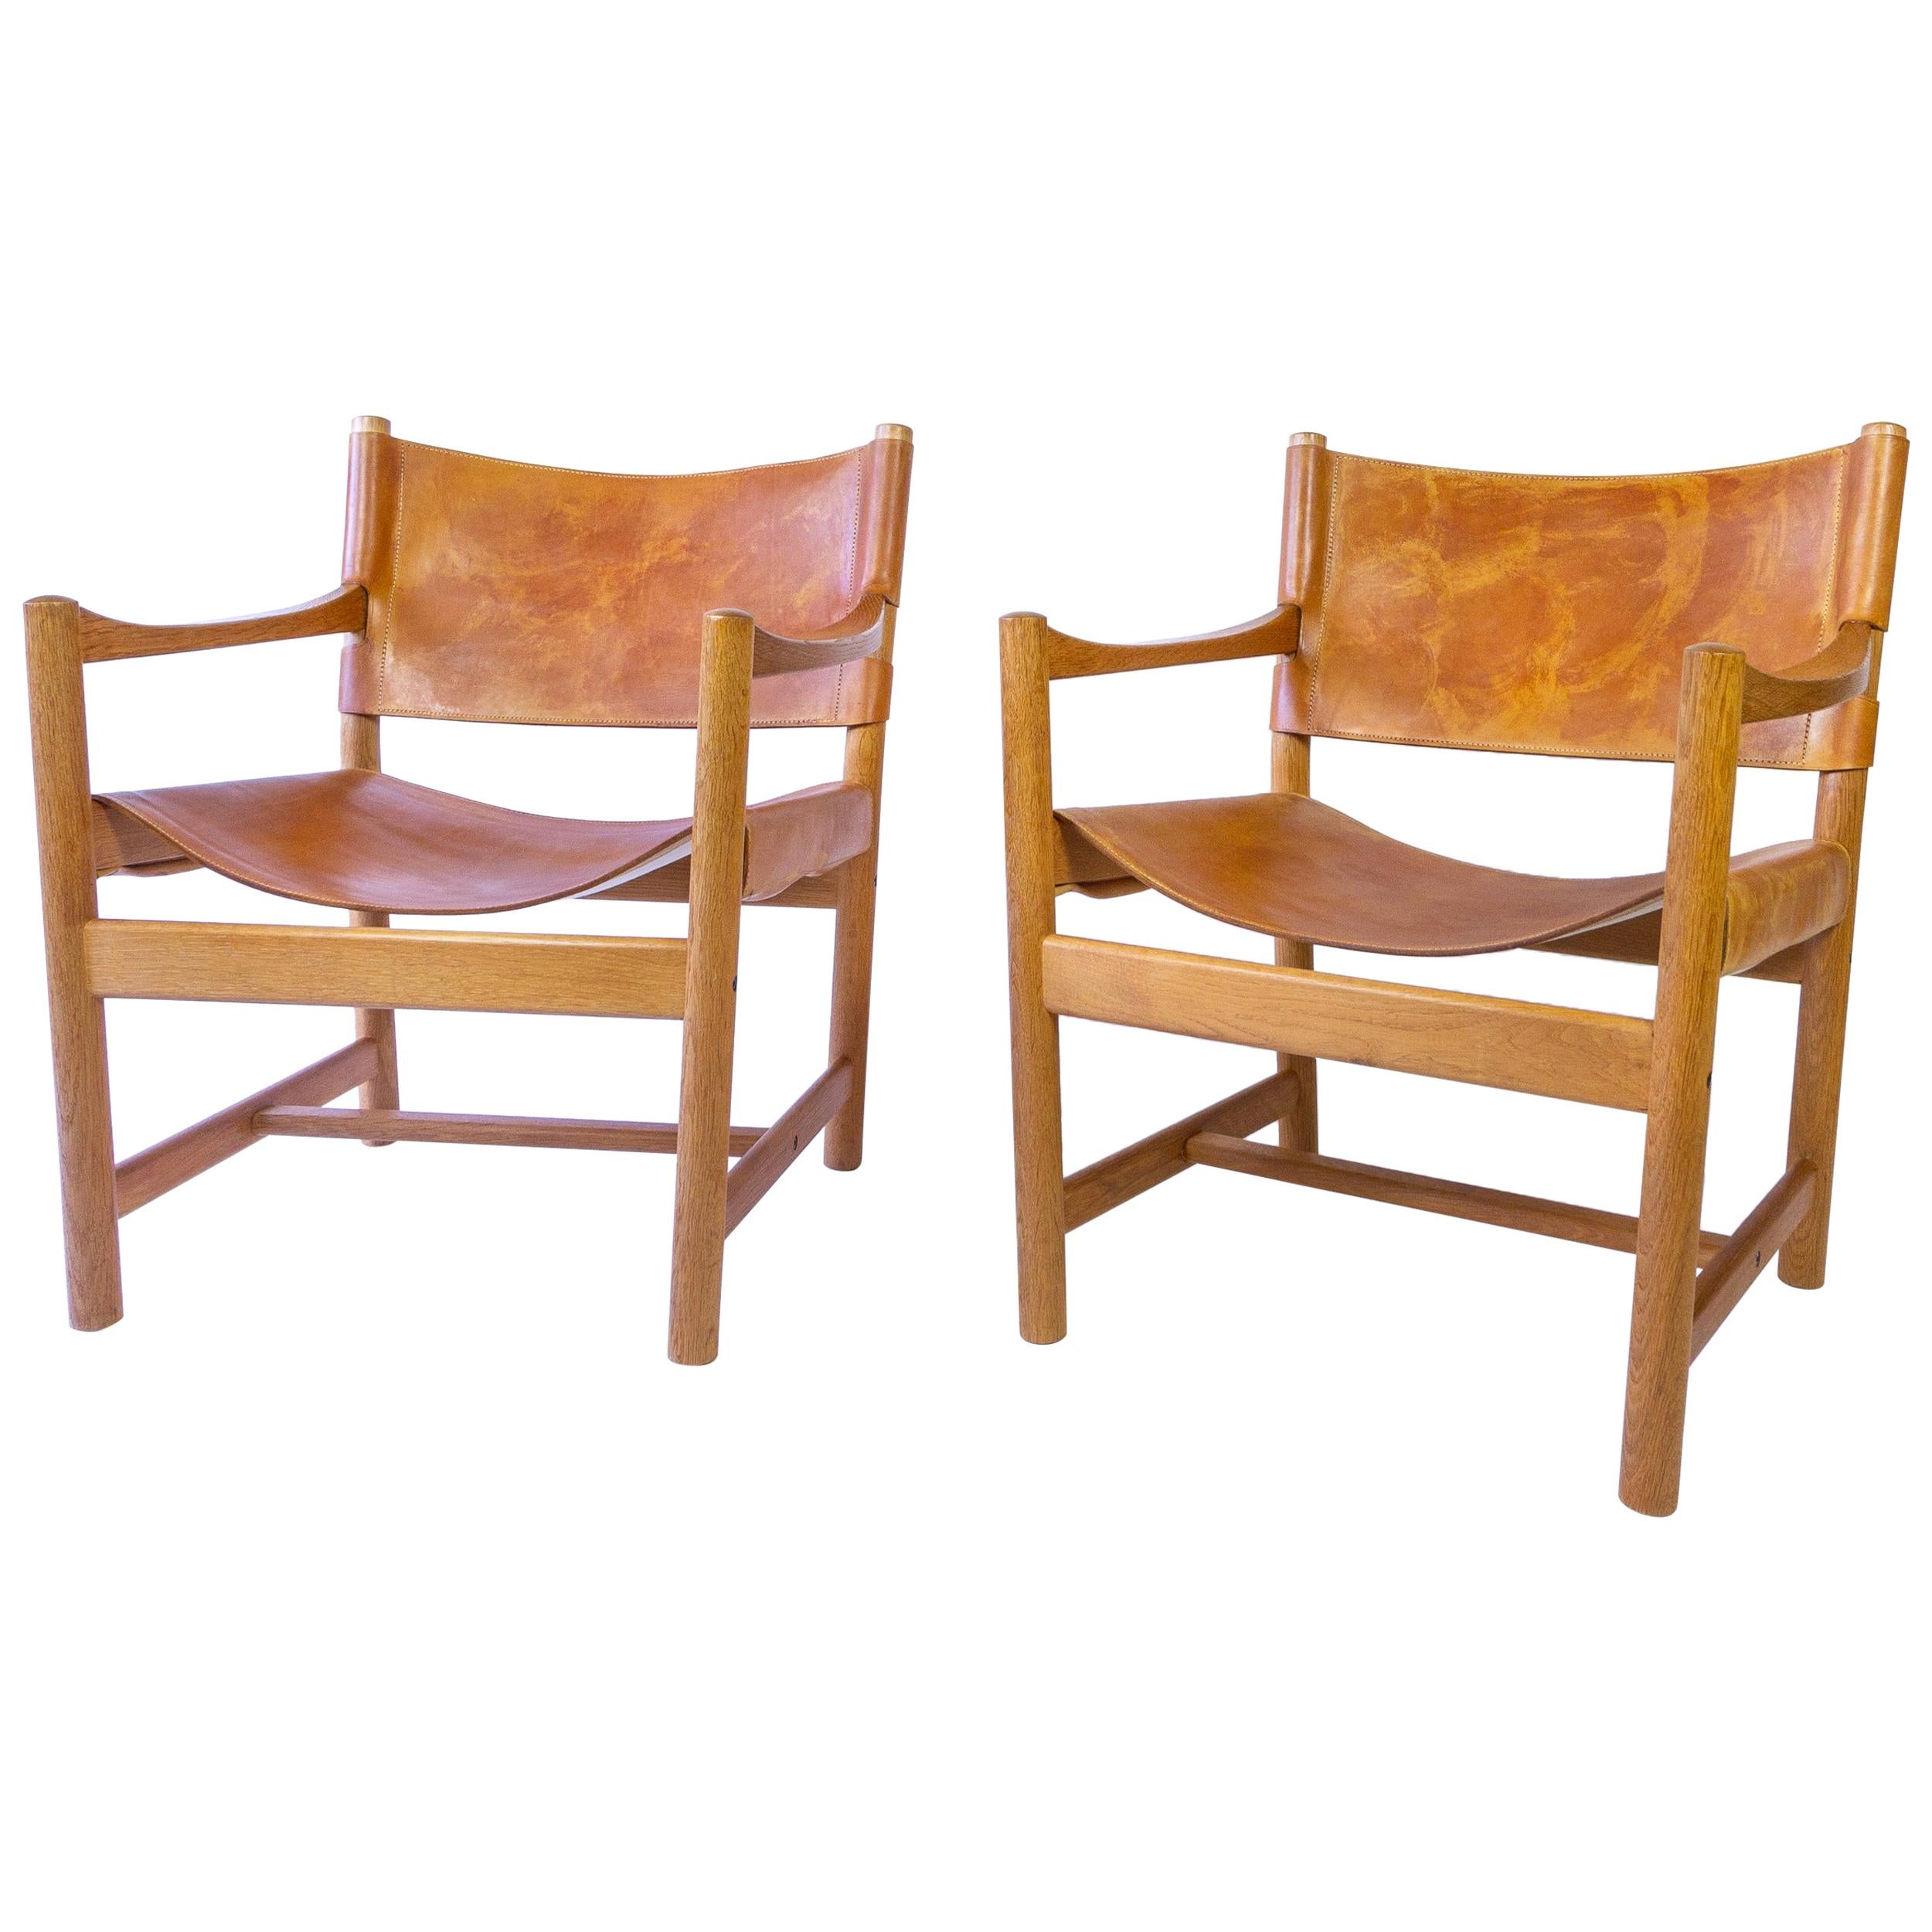 Pair of Cognac Leather and Oak Armchairs, Adrian & Ditte Heath for FDB, Denmark